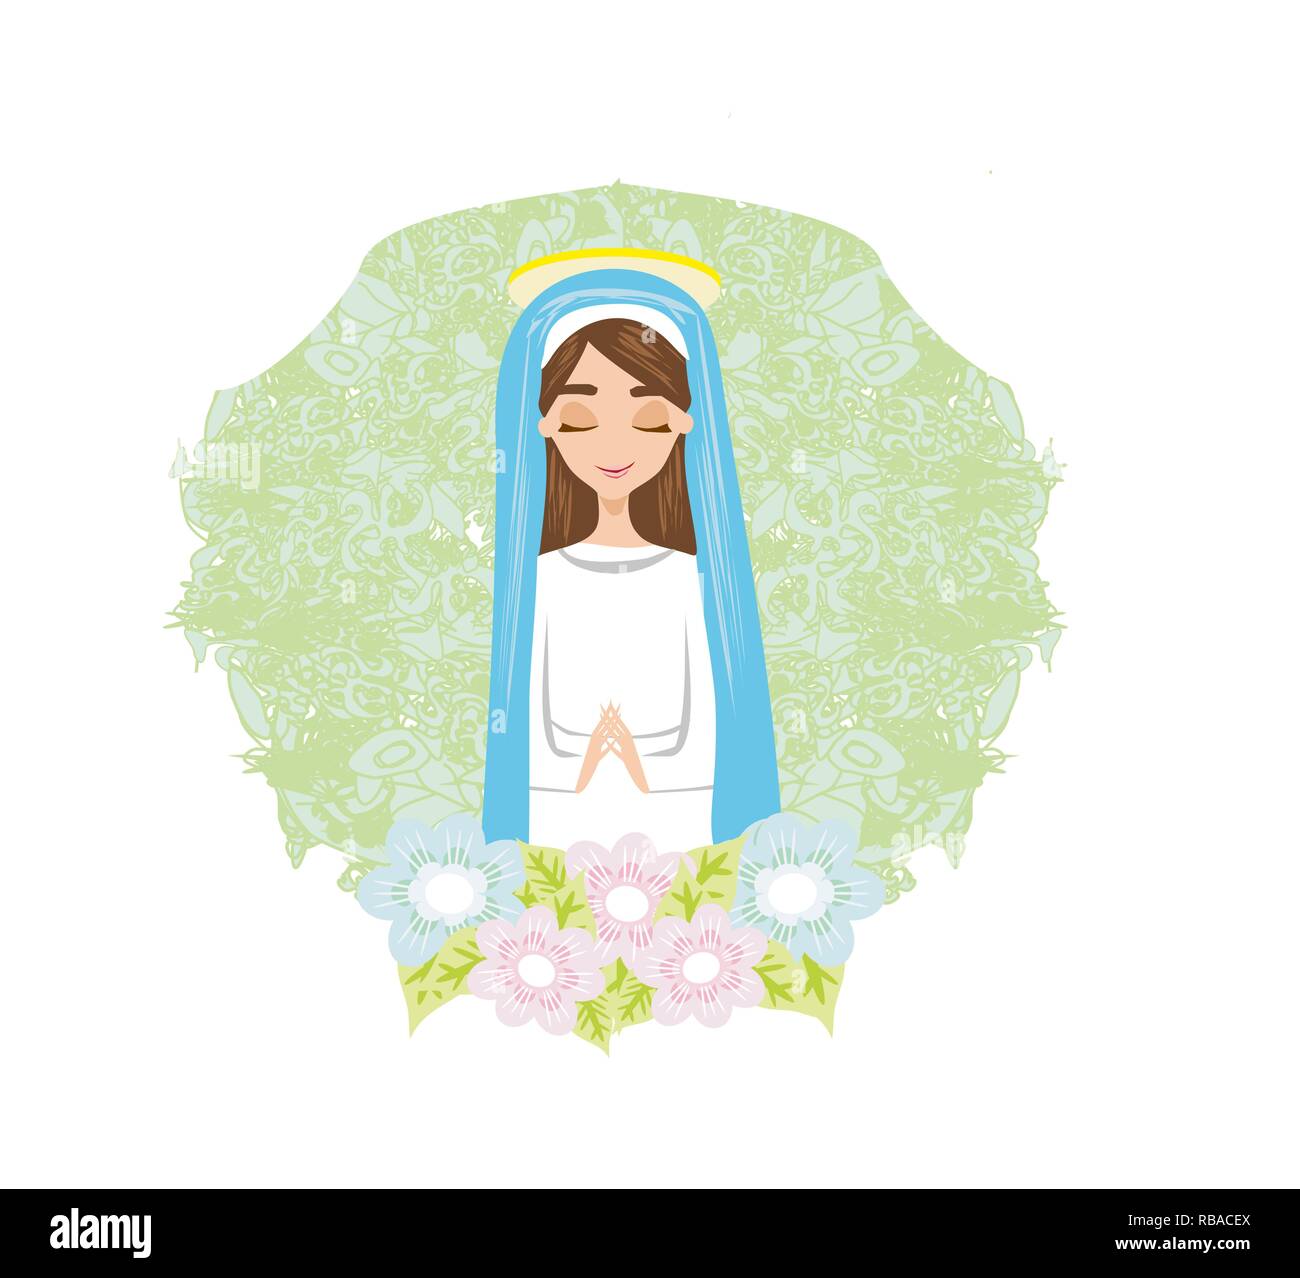 Our lady of saint mary Stock Vector Images - Alamy